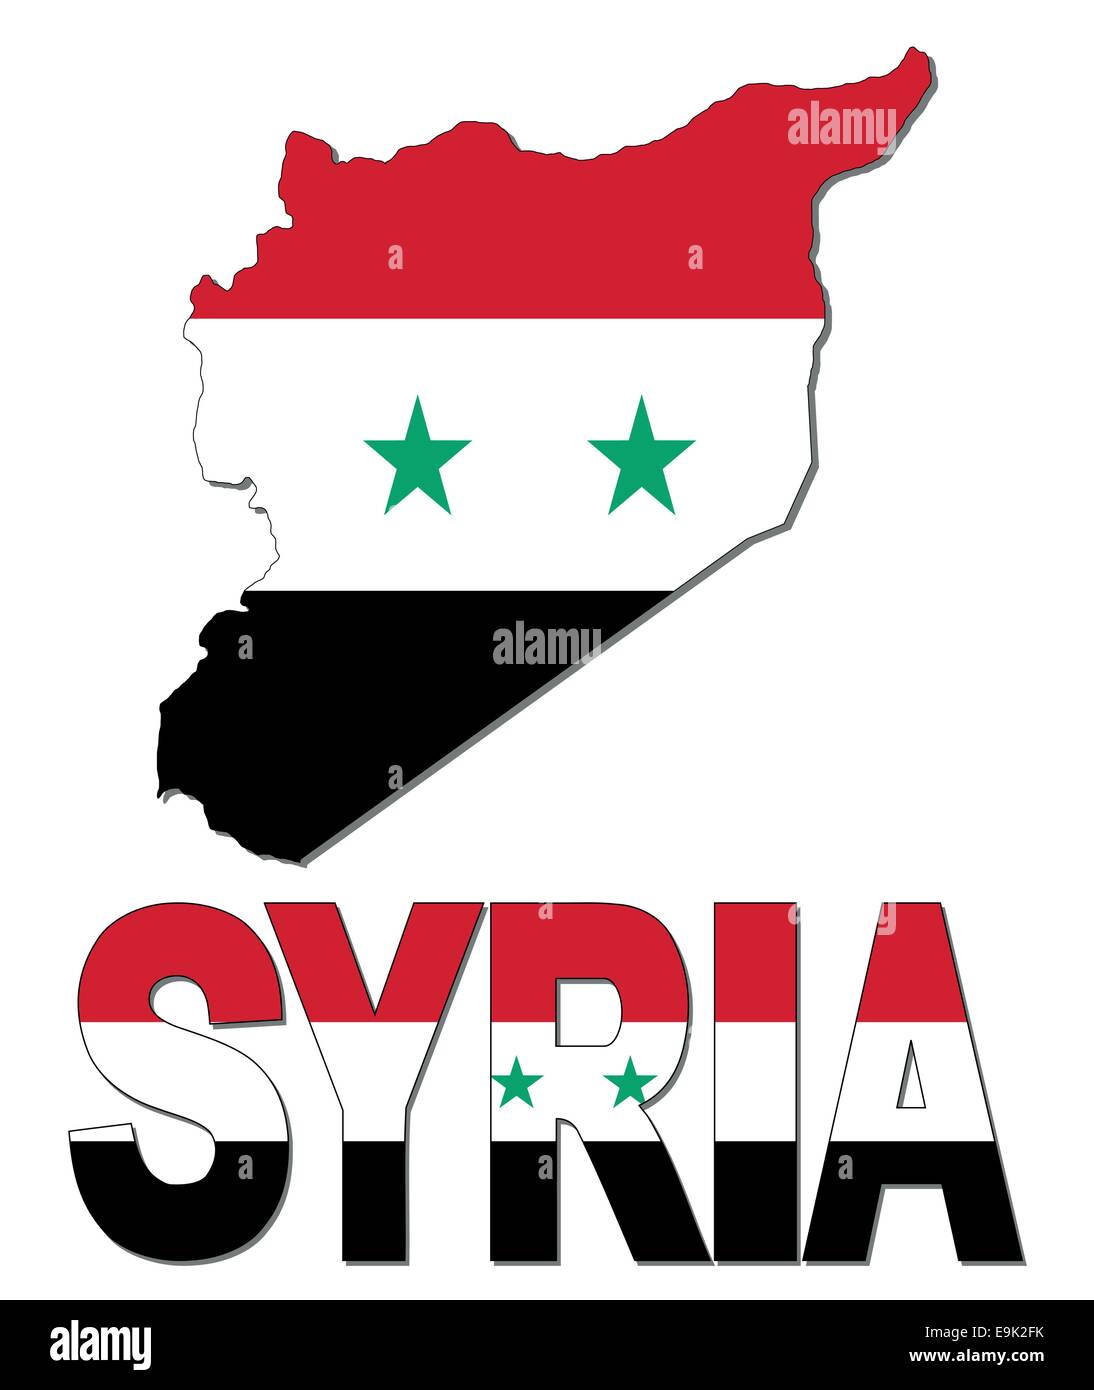 Syria map flag and text illustration Stock Vector